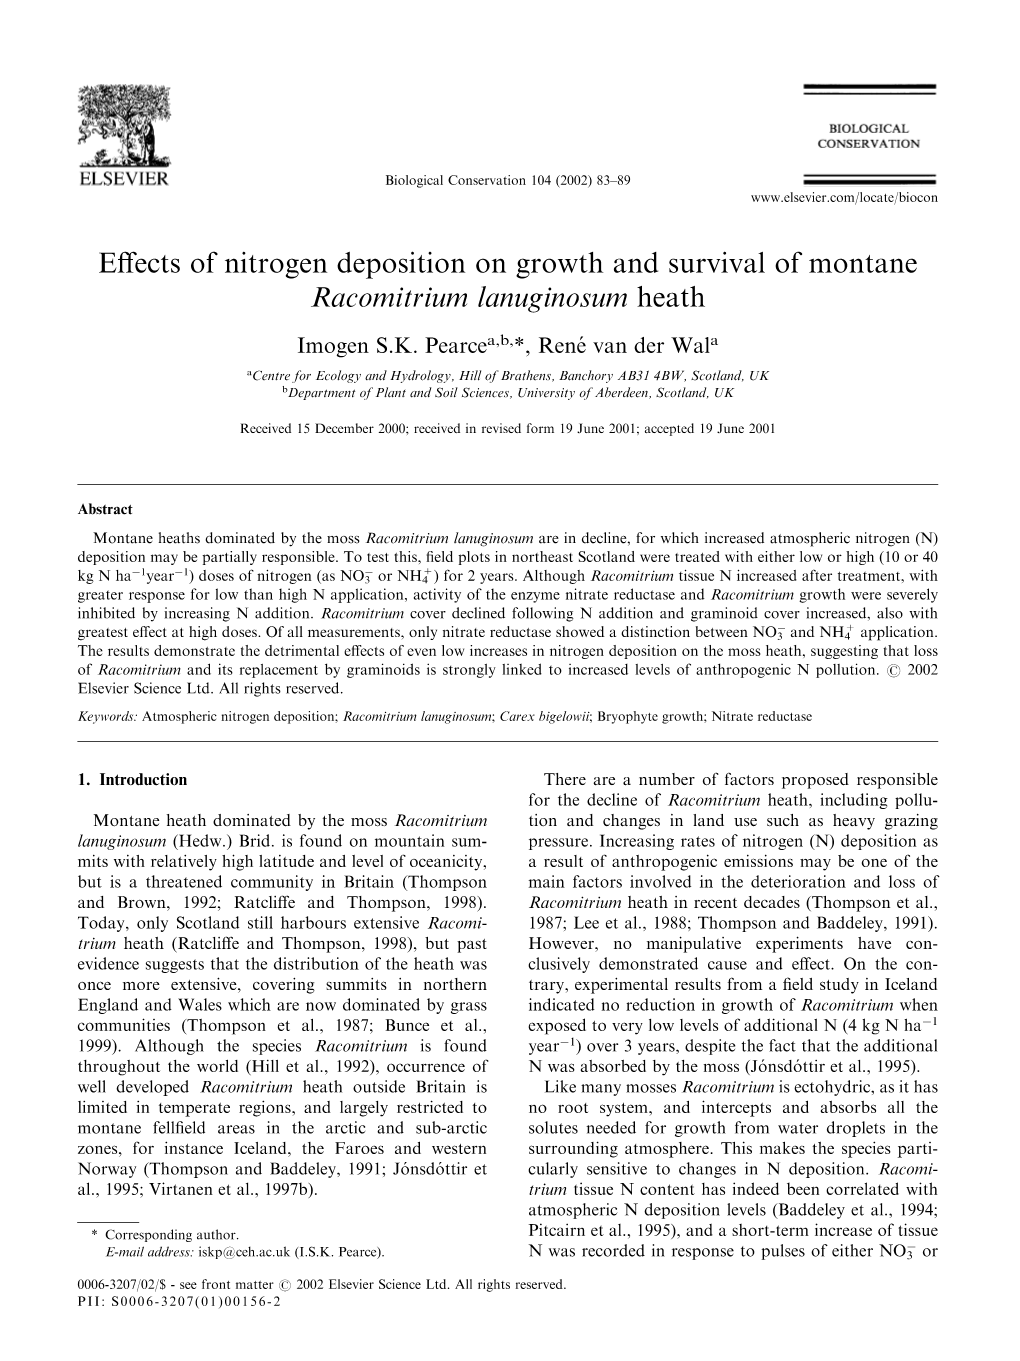 Effects of Nitrogen Deposition on Growth and Survival of Montane